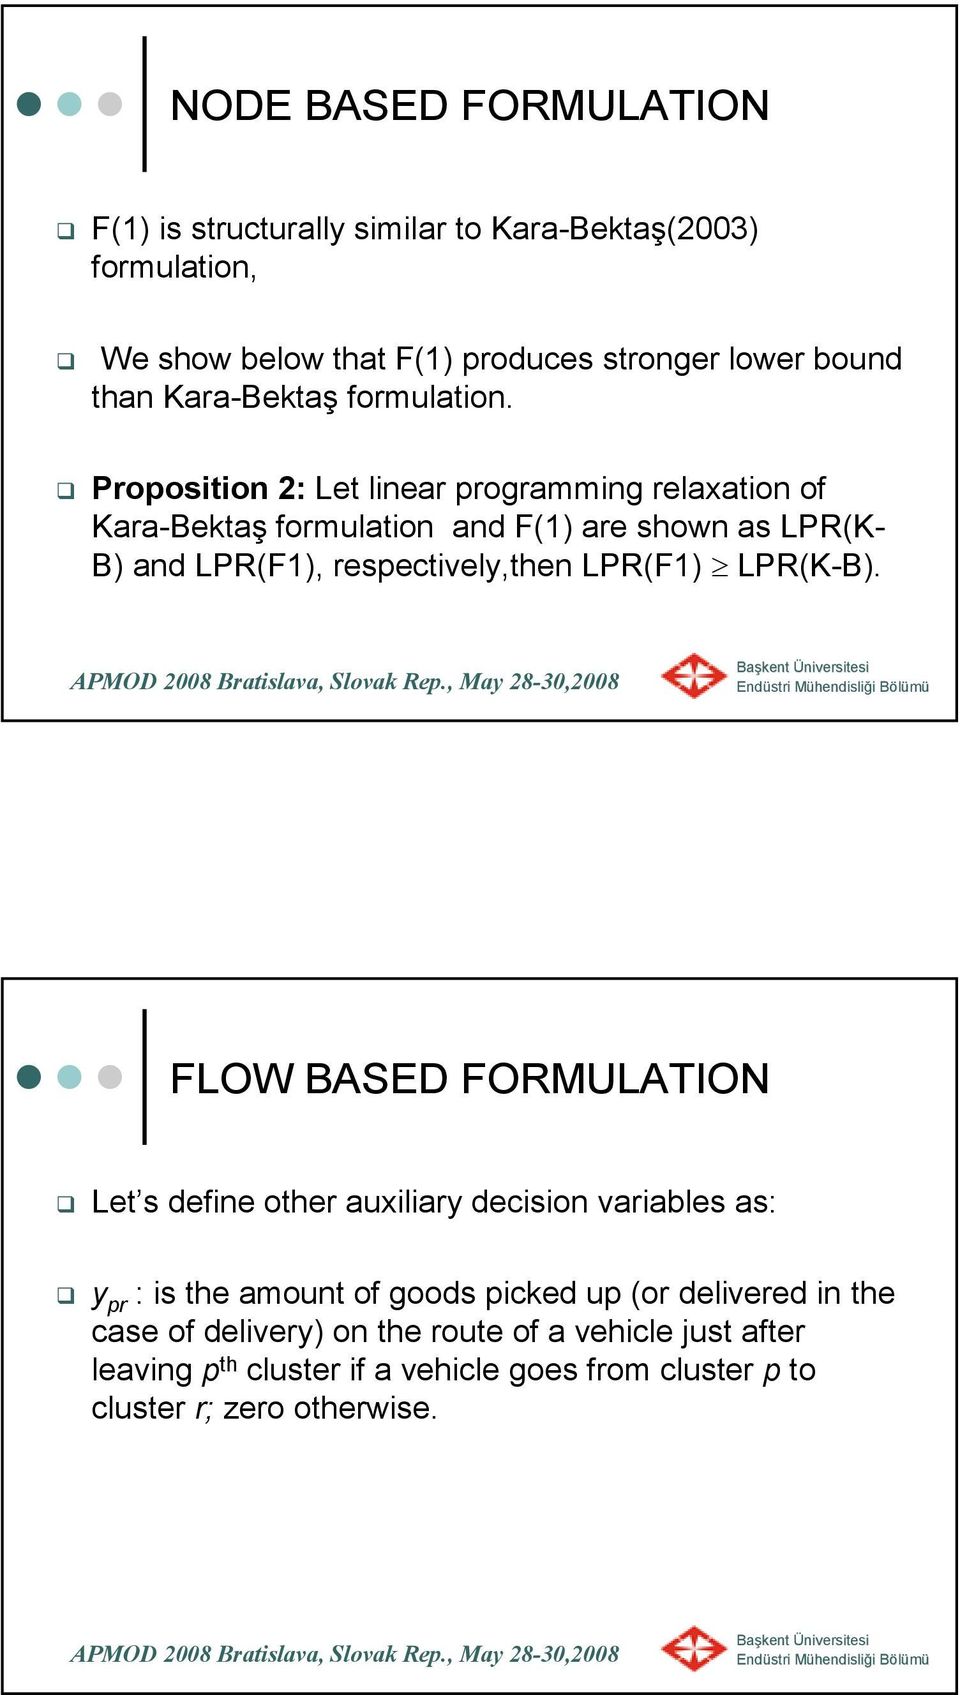 Proposition 2: Let linear programming relaxation of Kara-Bektaş formulation and F(1) are shown as LPR(K- B) and LPR(F1), respectively,then LPR(F1)